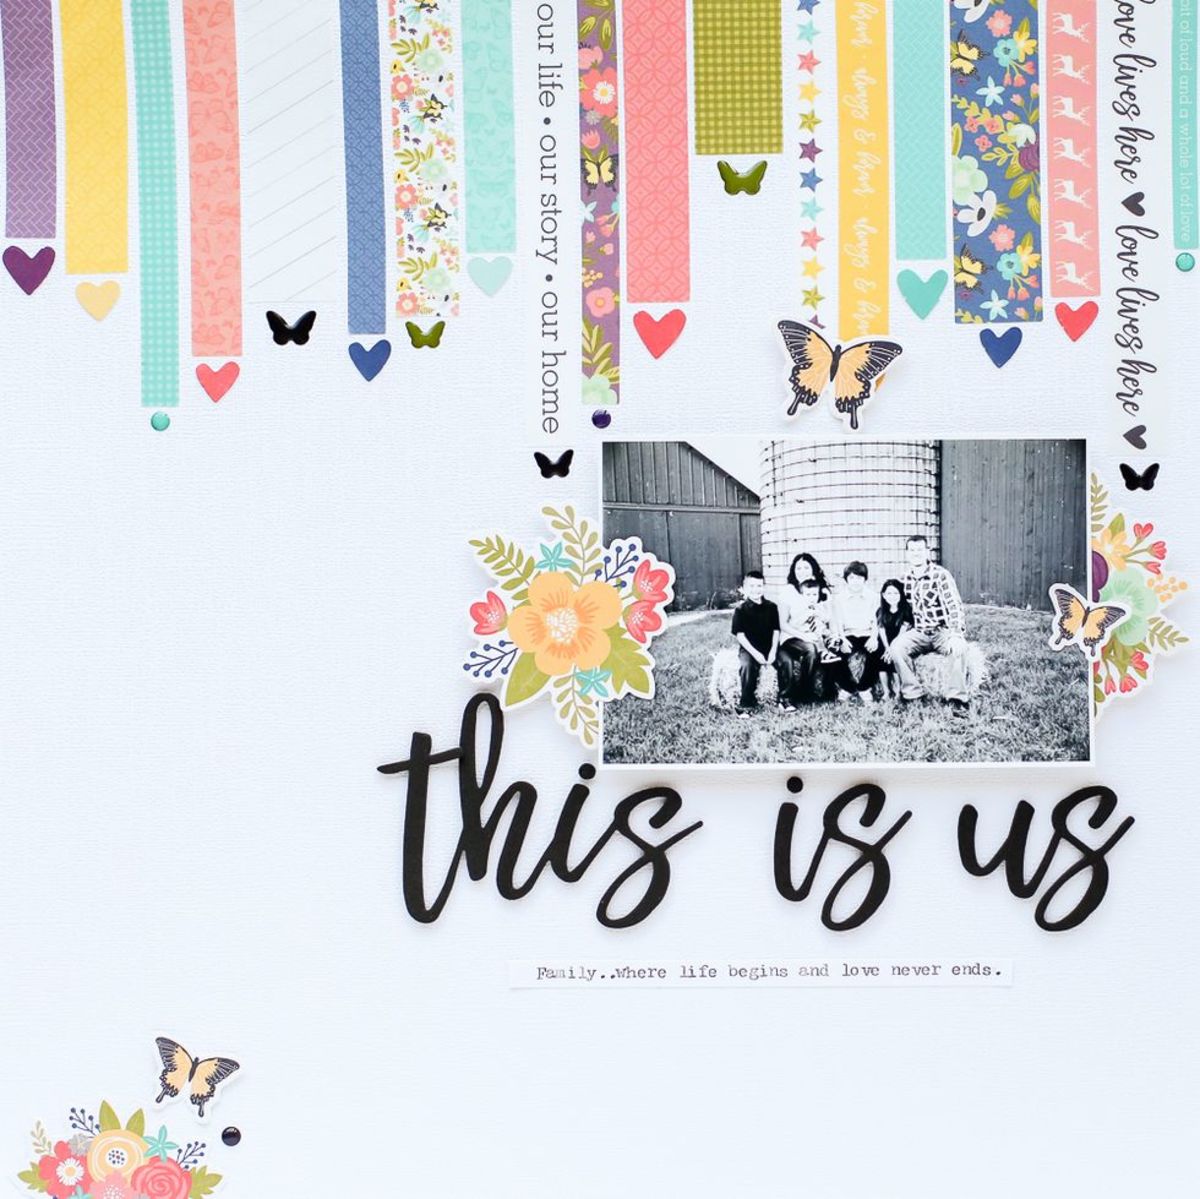 You can design with more than just paper. Look how pretty this washi tape design looks !